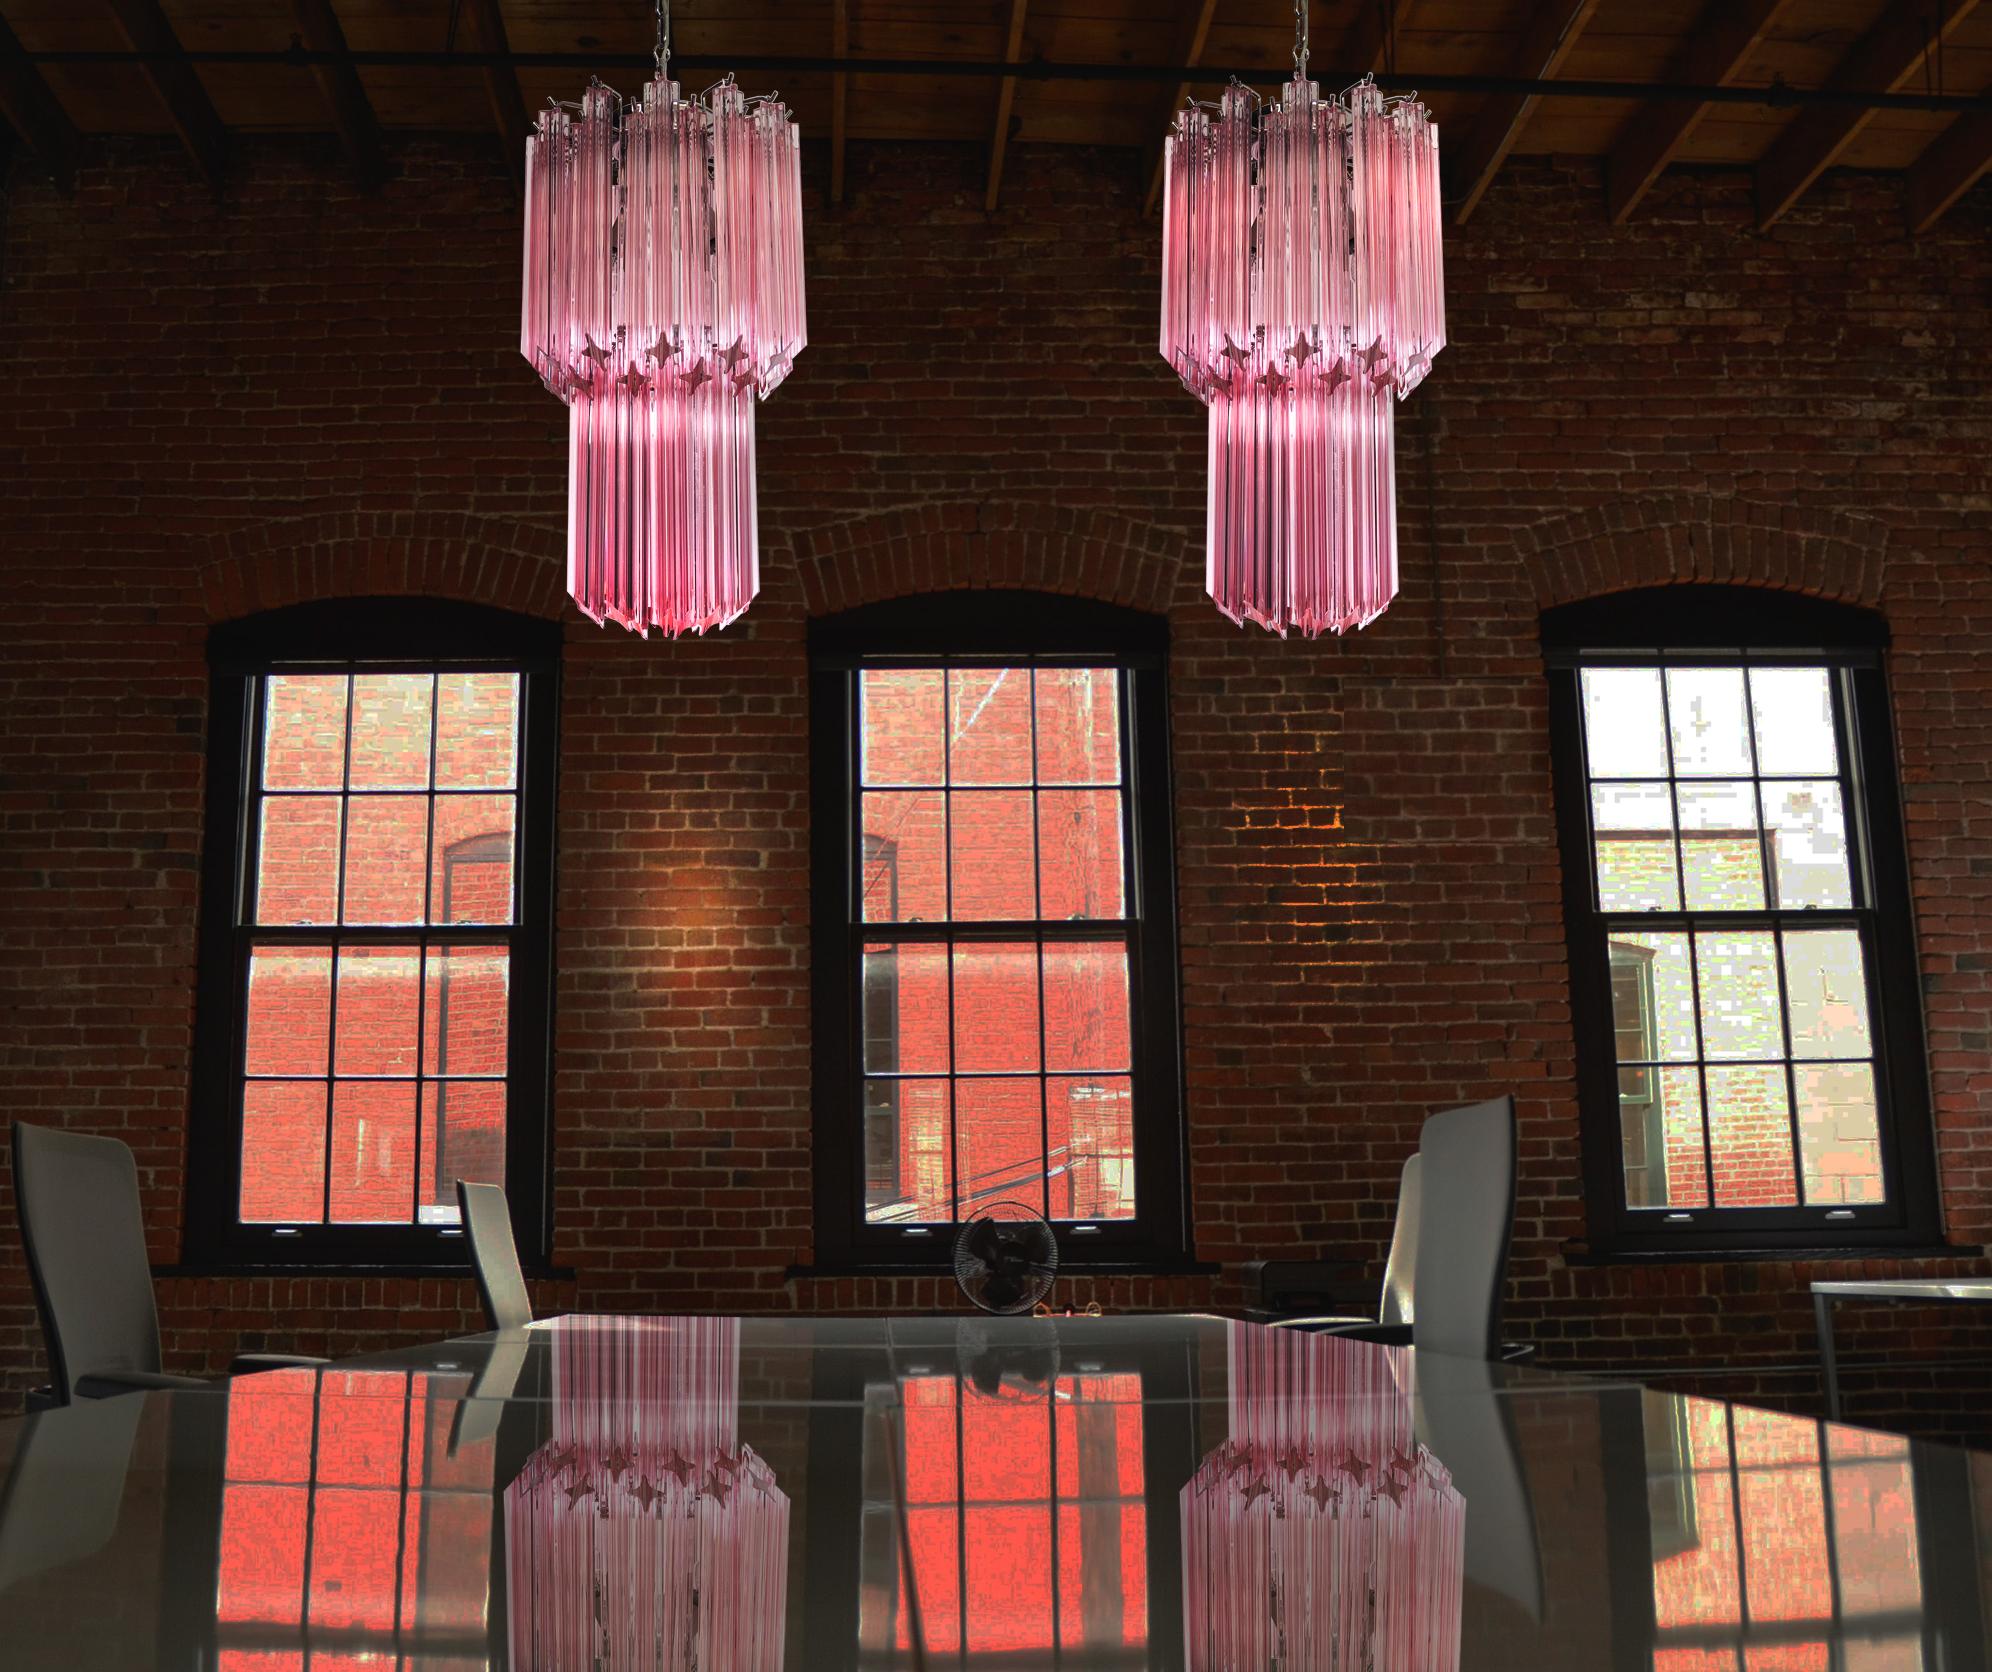 Pair of fantastic vintage Murano chandeliers made by 46 Murano crystal pink prism in a nickel metal frame.
Period: late 20th century
Dimensions: 55.10 inches height (140 cm) with chain; 27.50 inches height (70 cm) without chain; 12.6 inches diameter